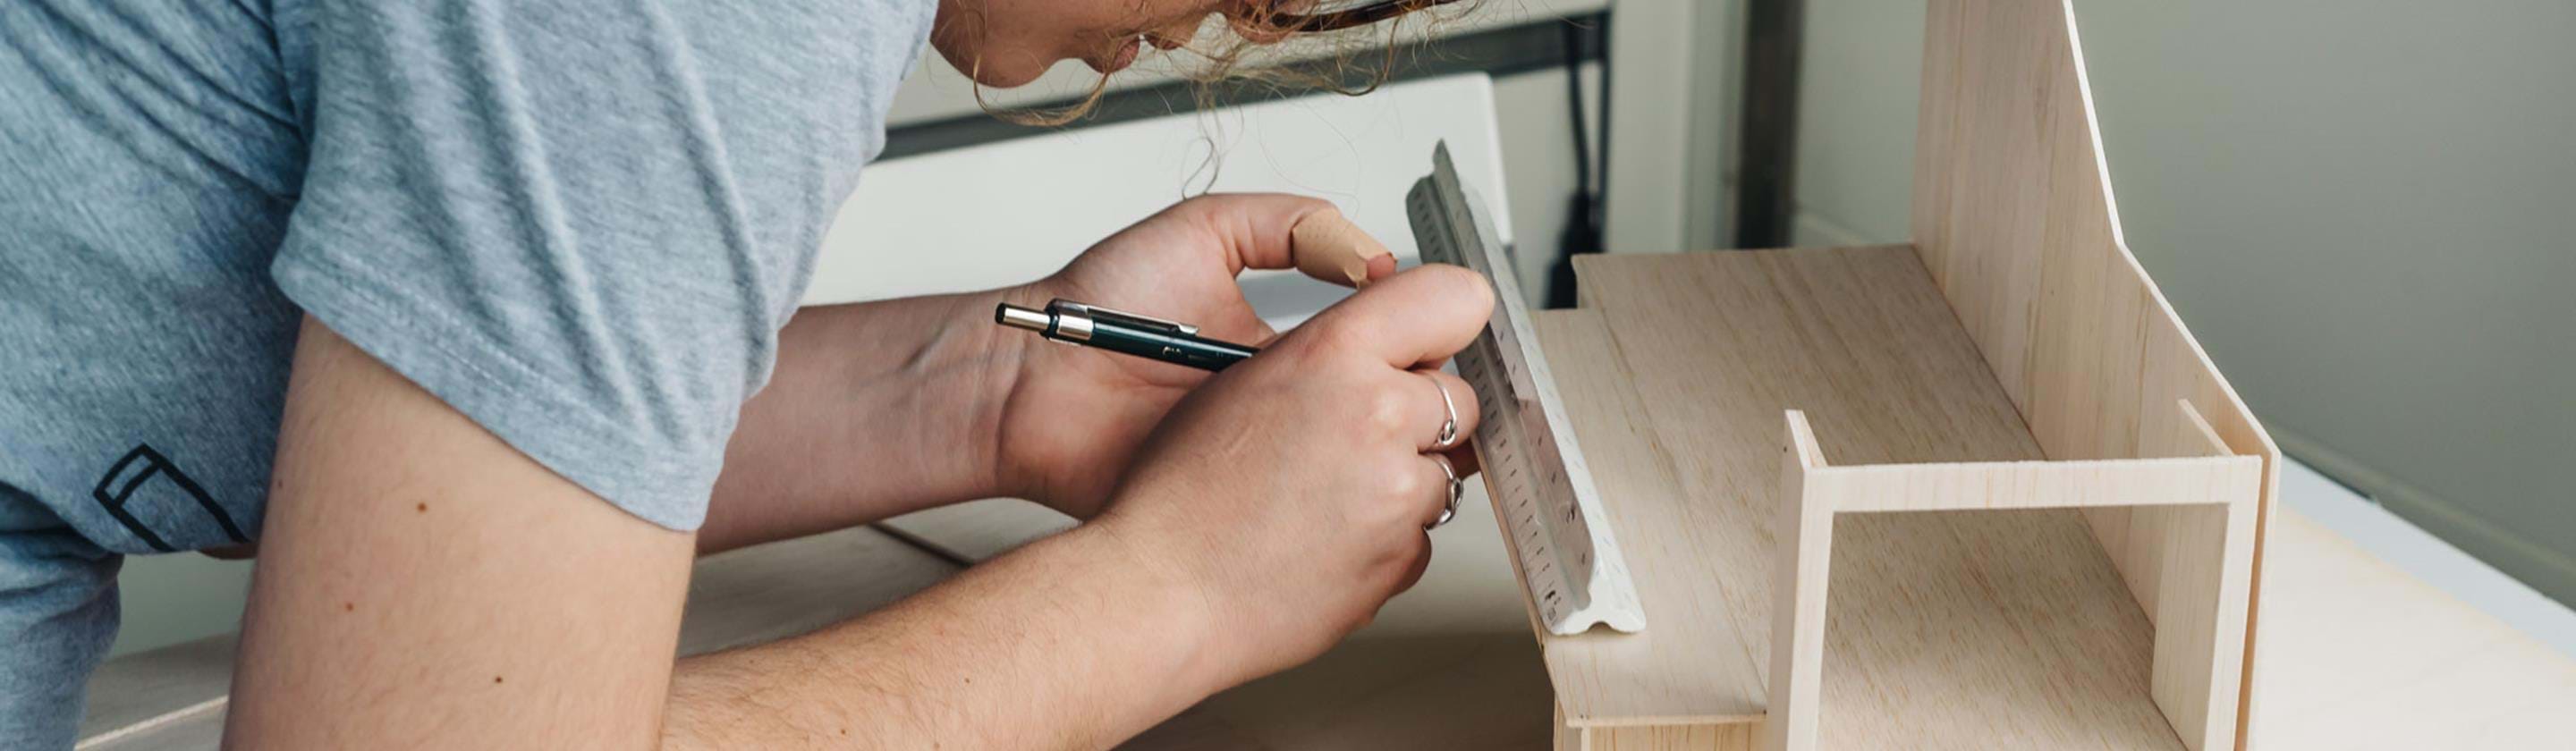 A person designing a wooden prototype of a building